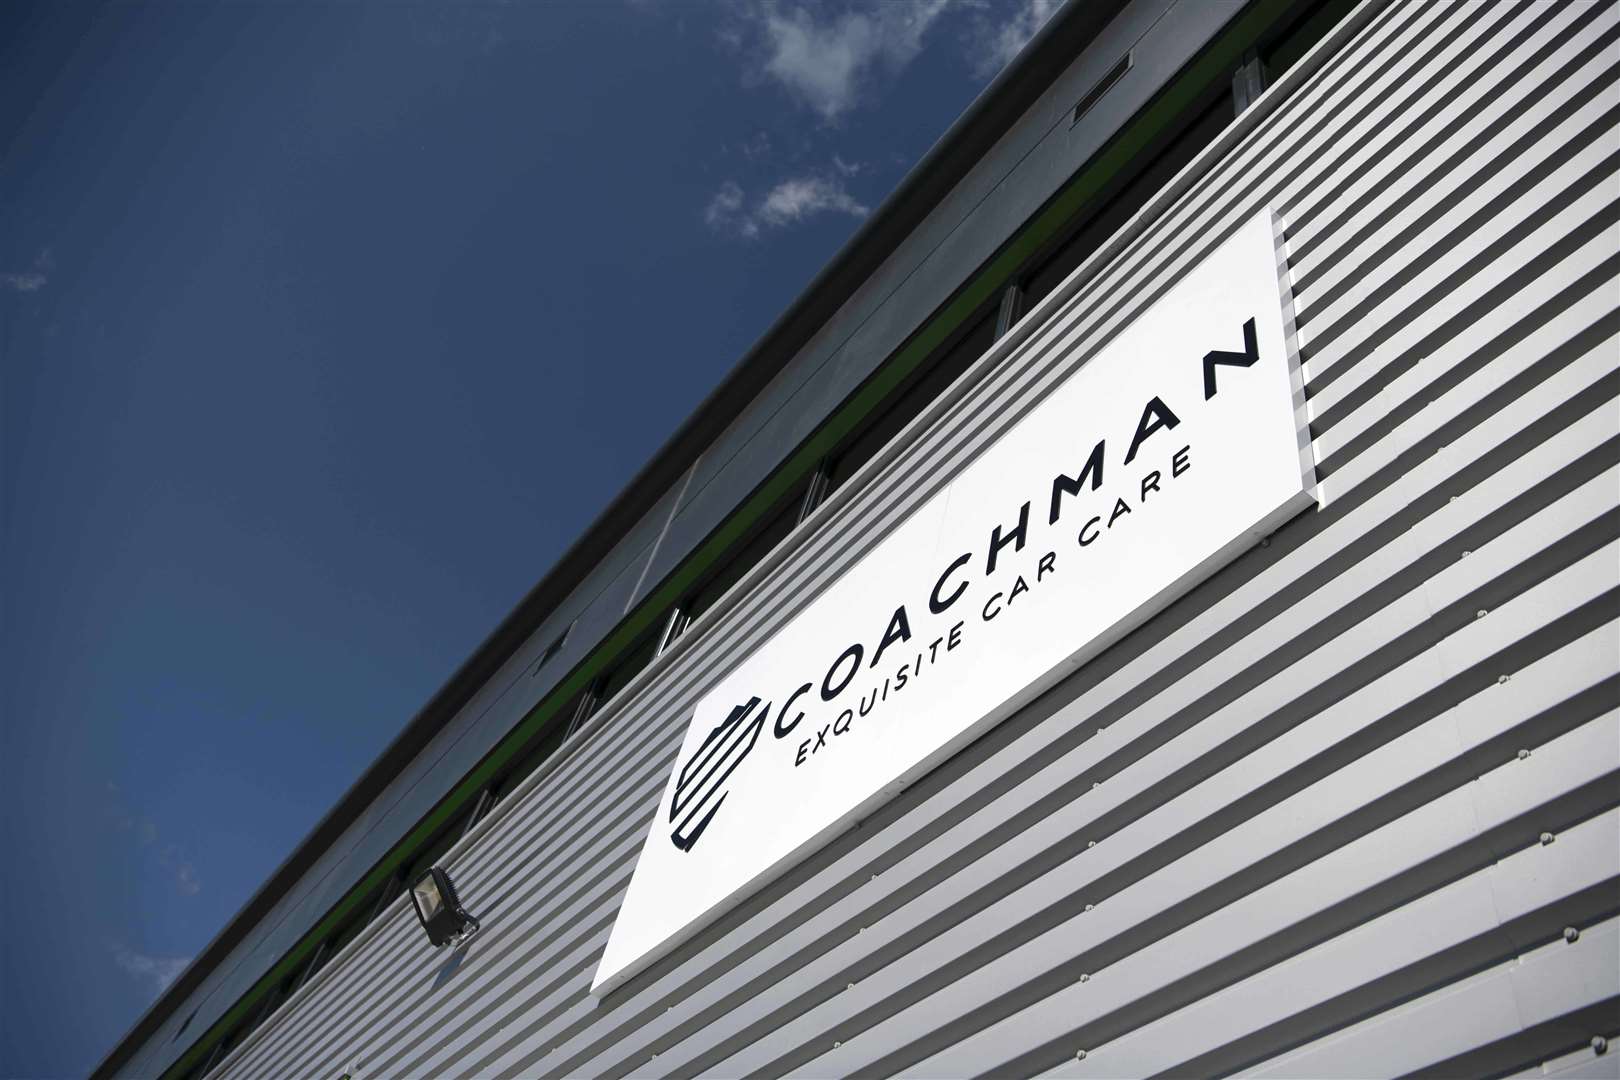 Coachman's studio is situated conveniently in the Maidstone Exchange on the Parkwood Industrial Estate.